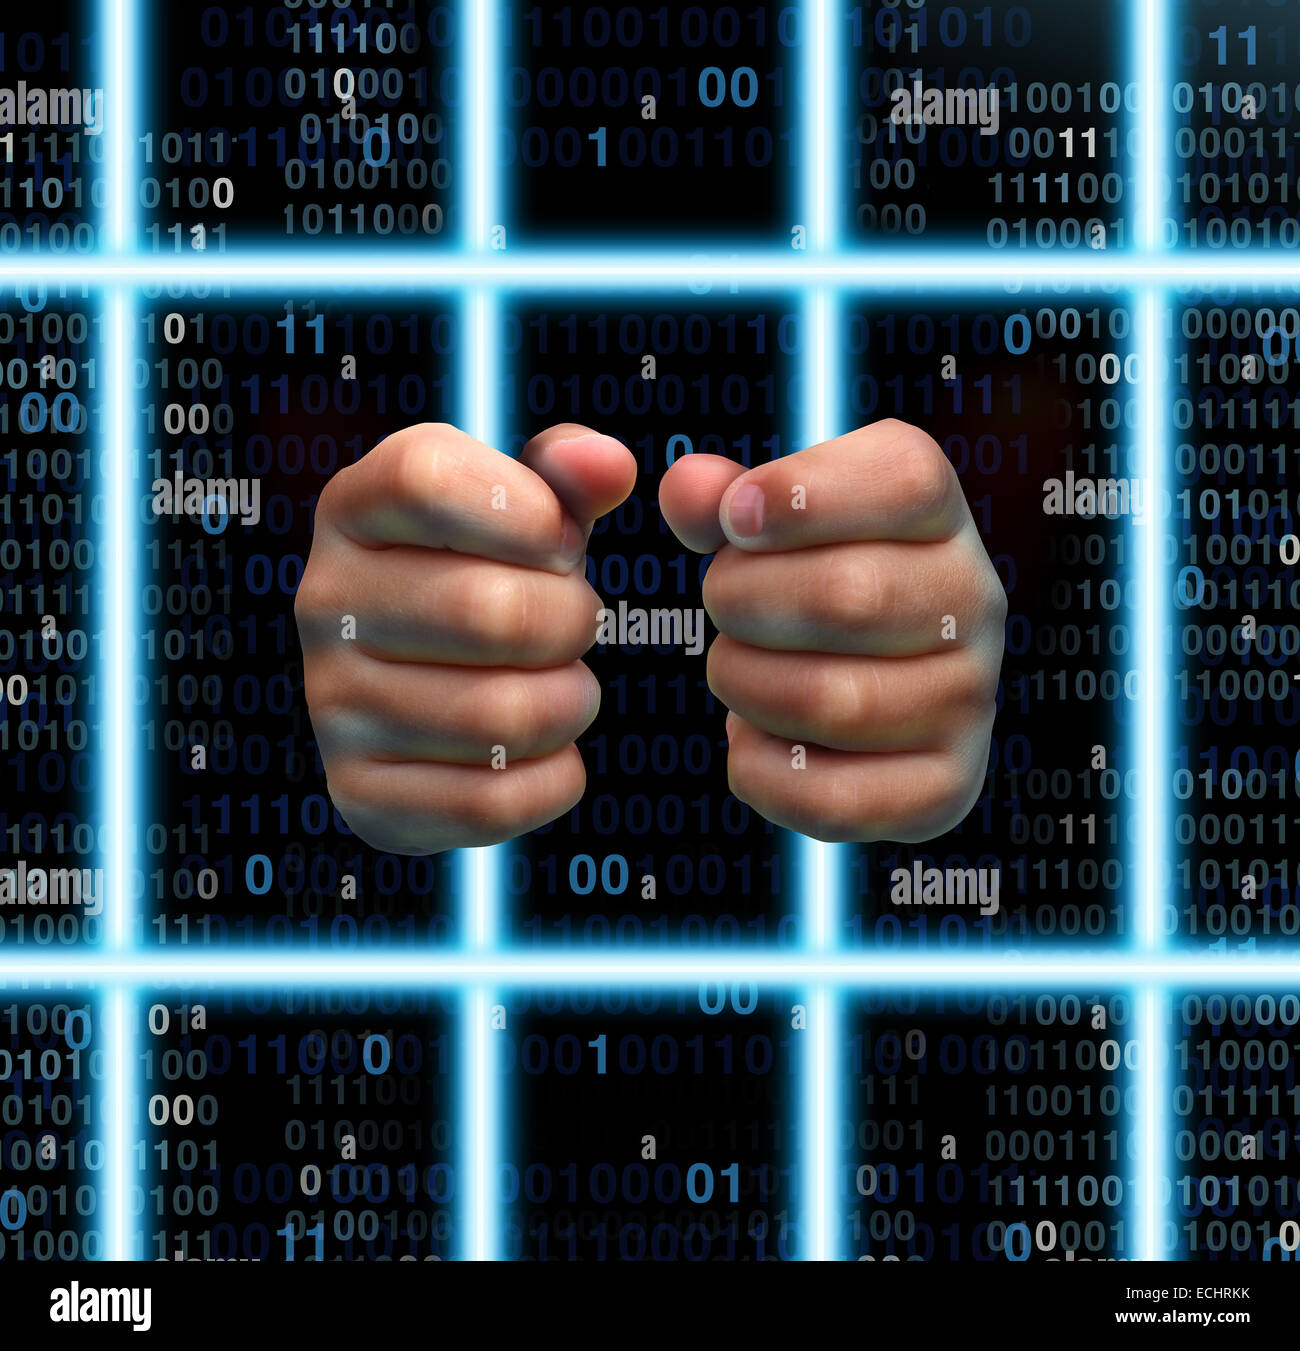 Technology prison and internet addiction victim concept as human hands holding virtual jail bars made from computer laser beams Stock Photo